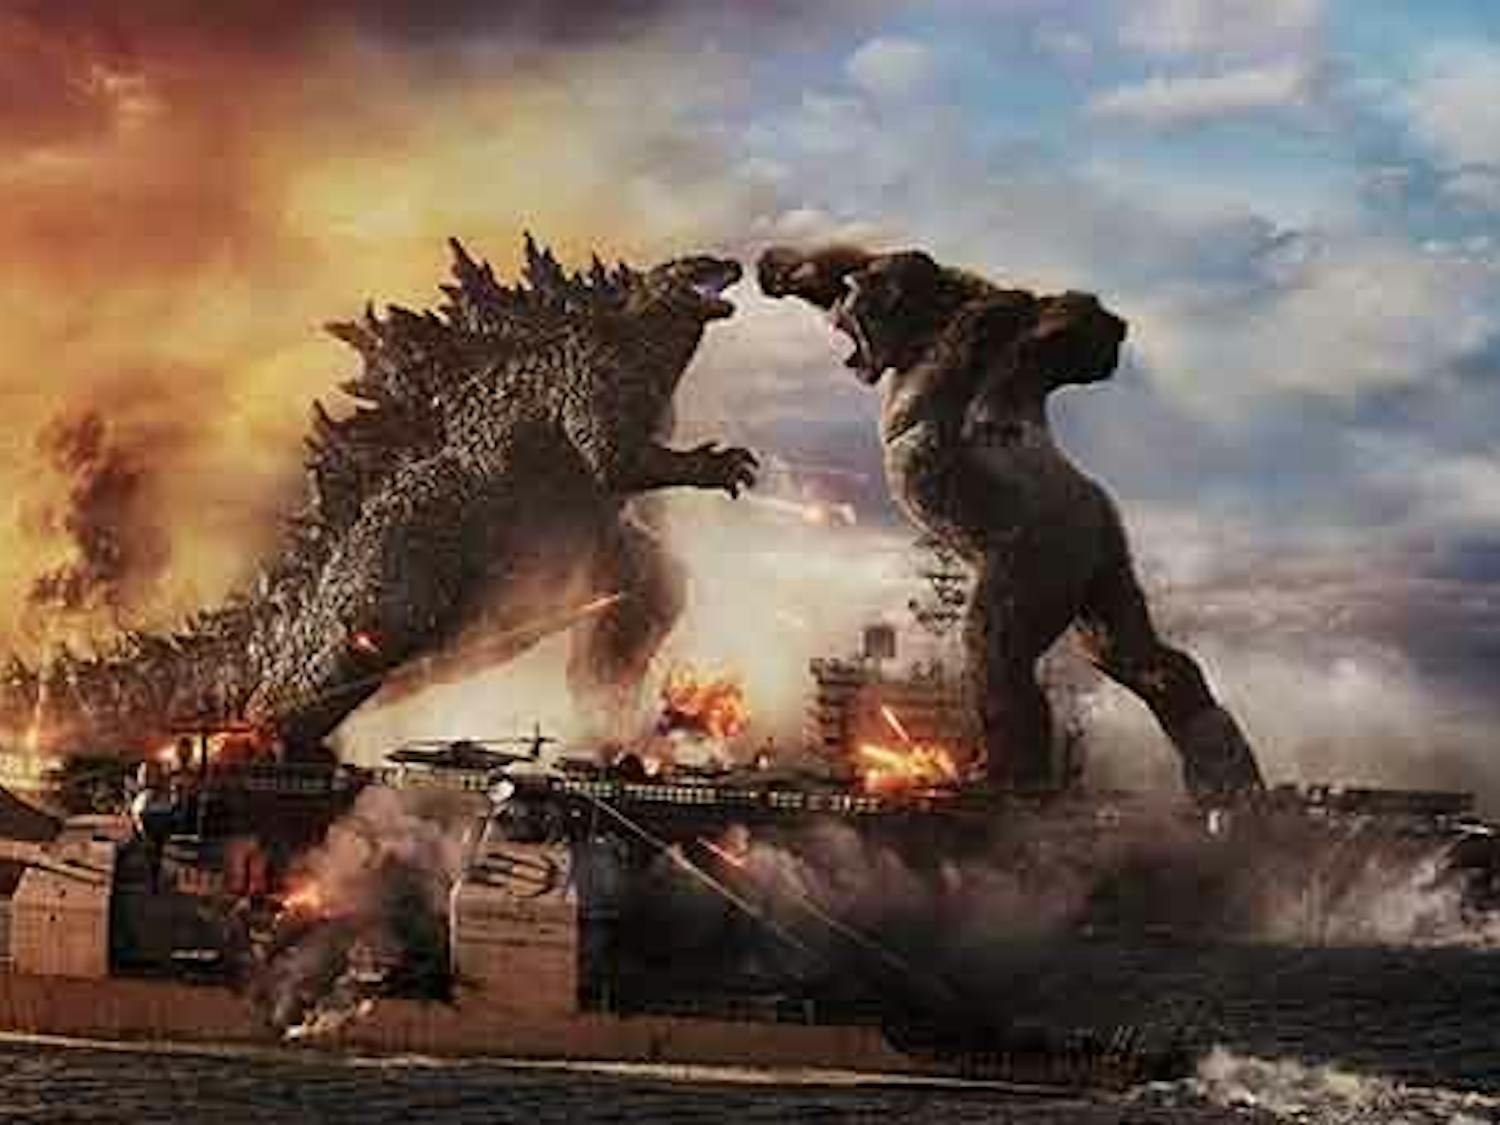 Godzilla battles Kong in Warner Bros. Pictures’ and Legendary Pictures’ action-adventure “Godzilla vs. Kong.”